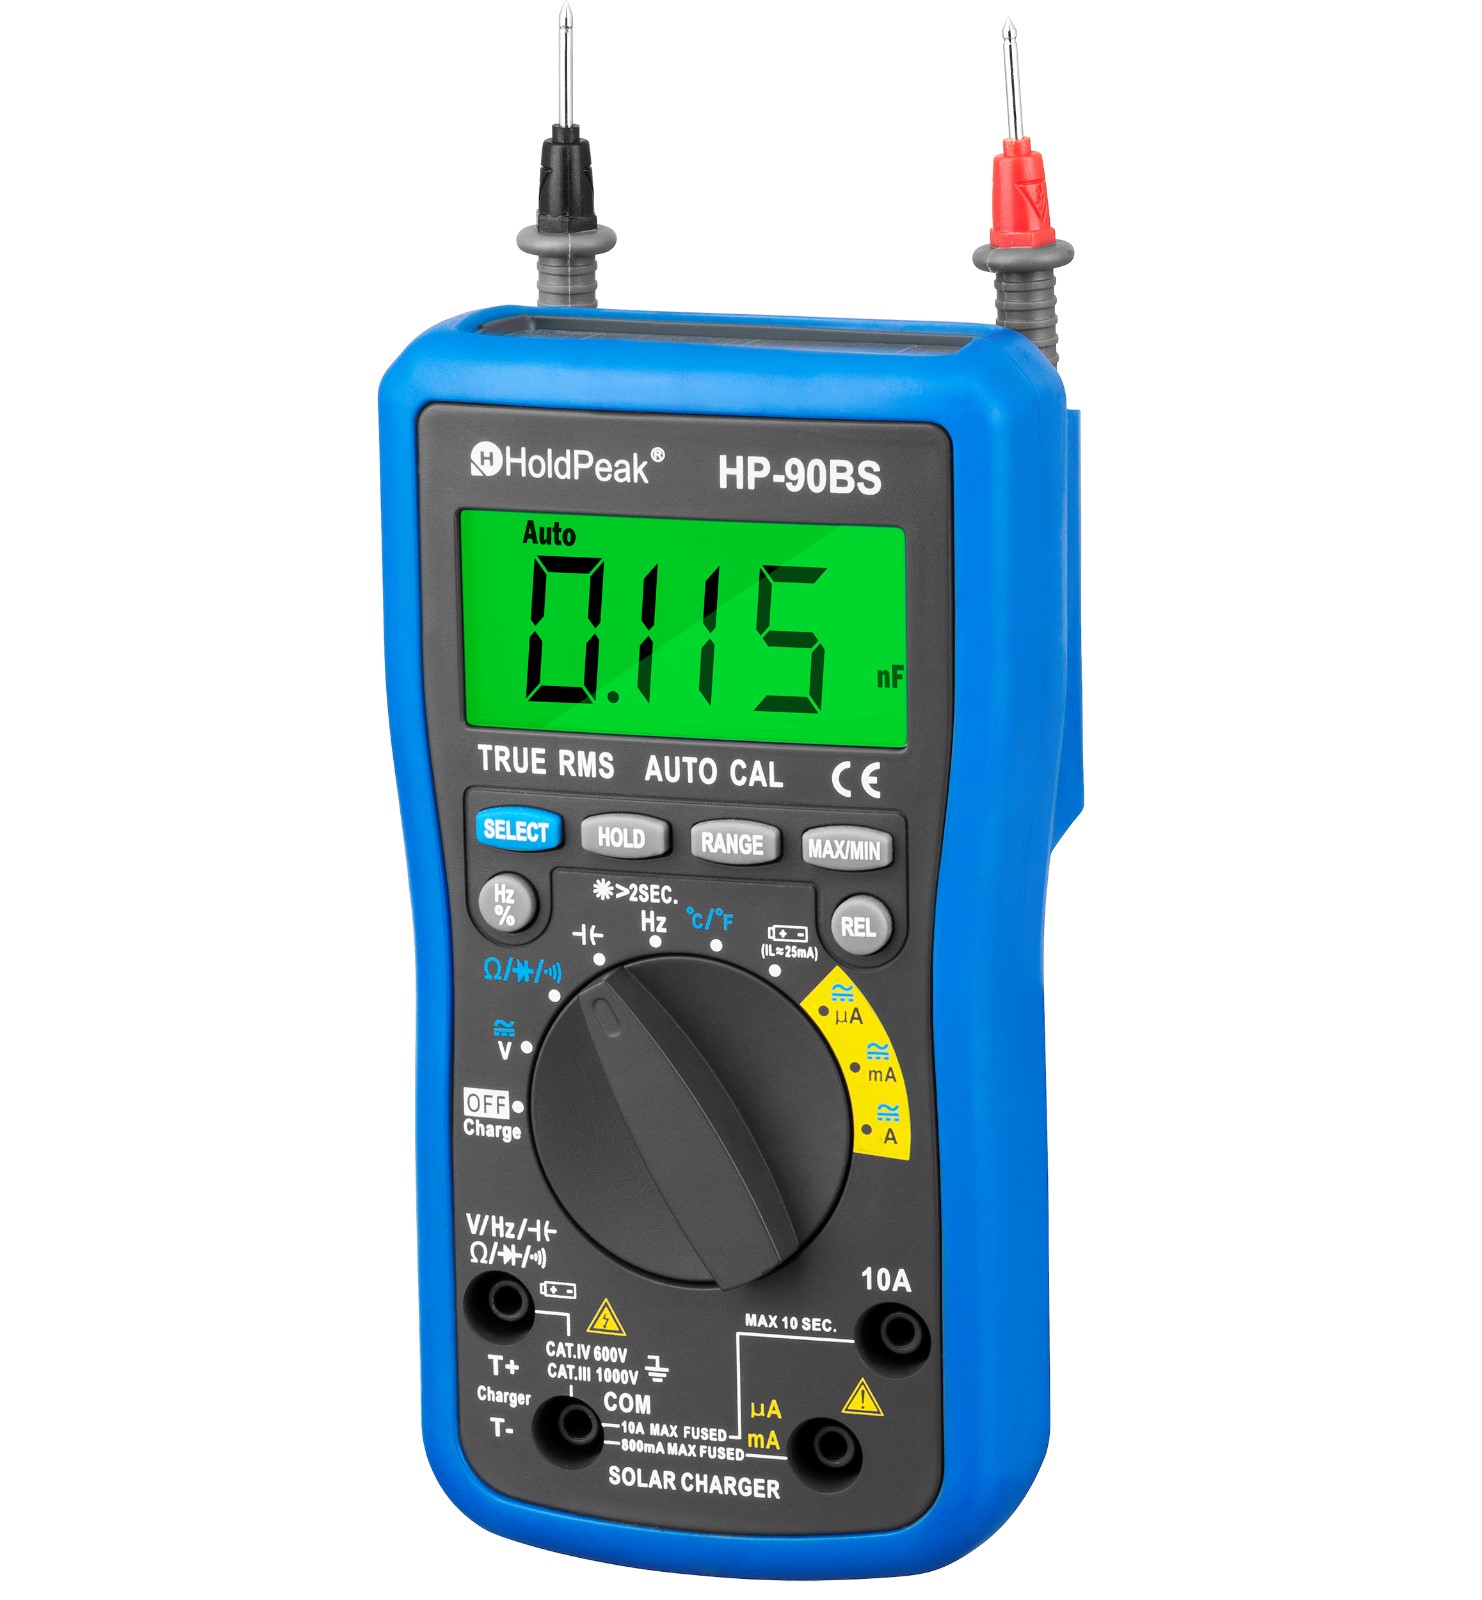 HoldPeak excellent parts of multimeter and its function Suppliers for testing